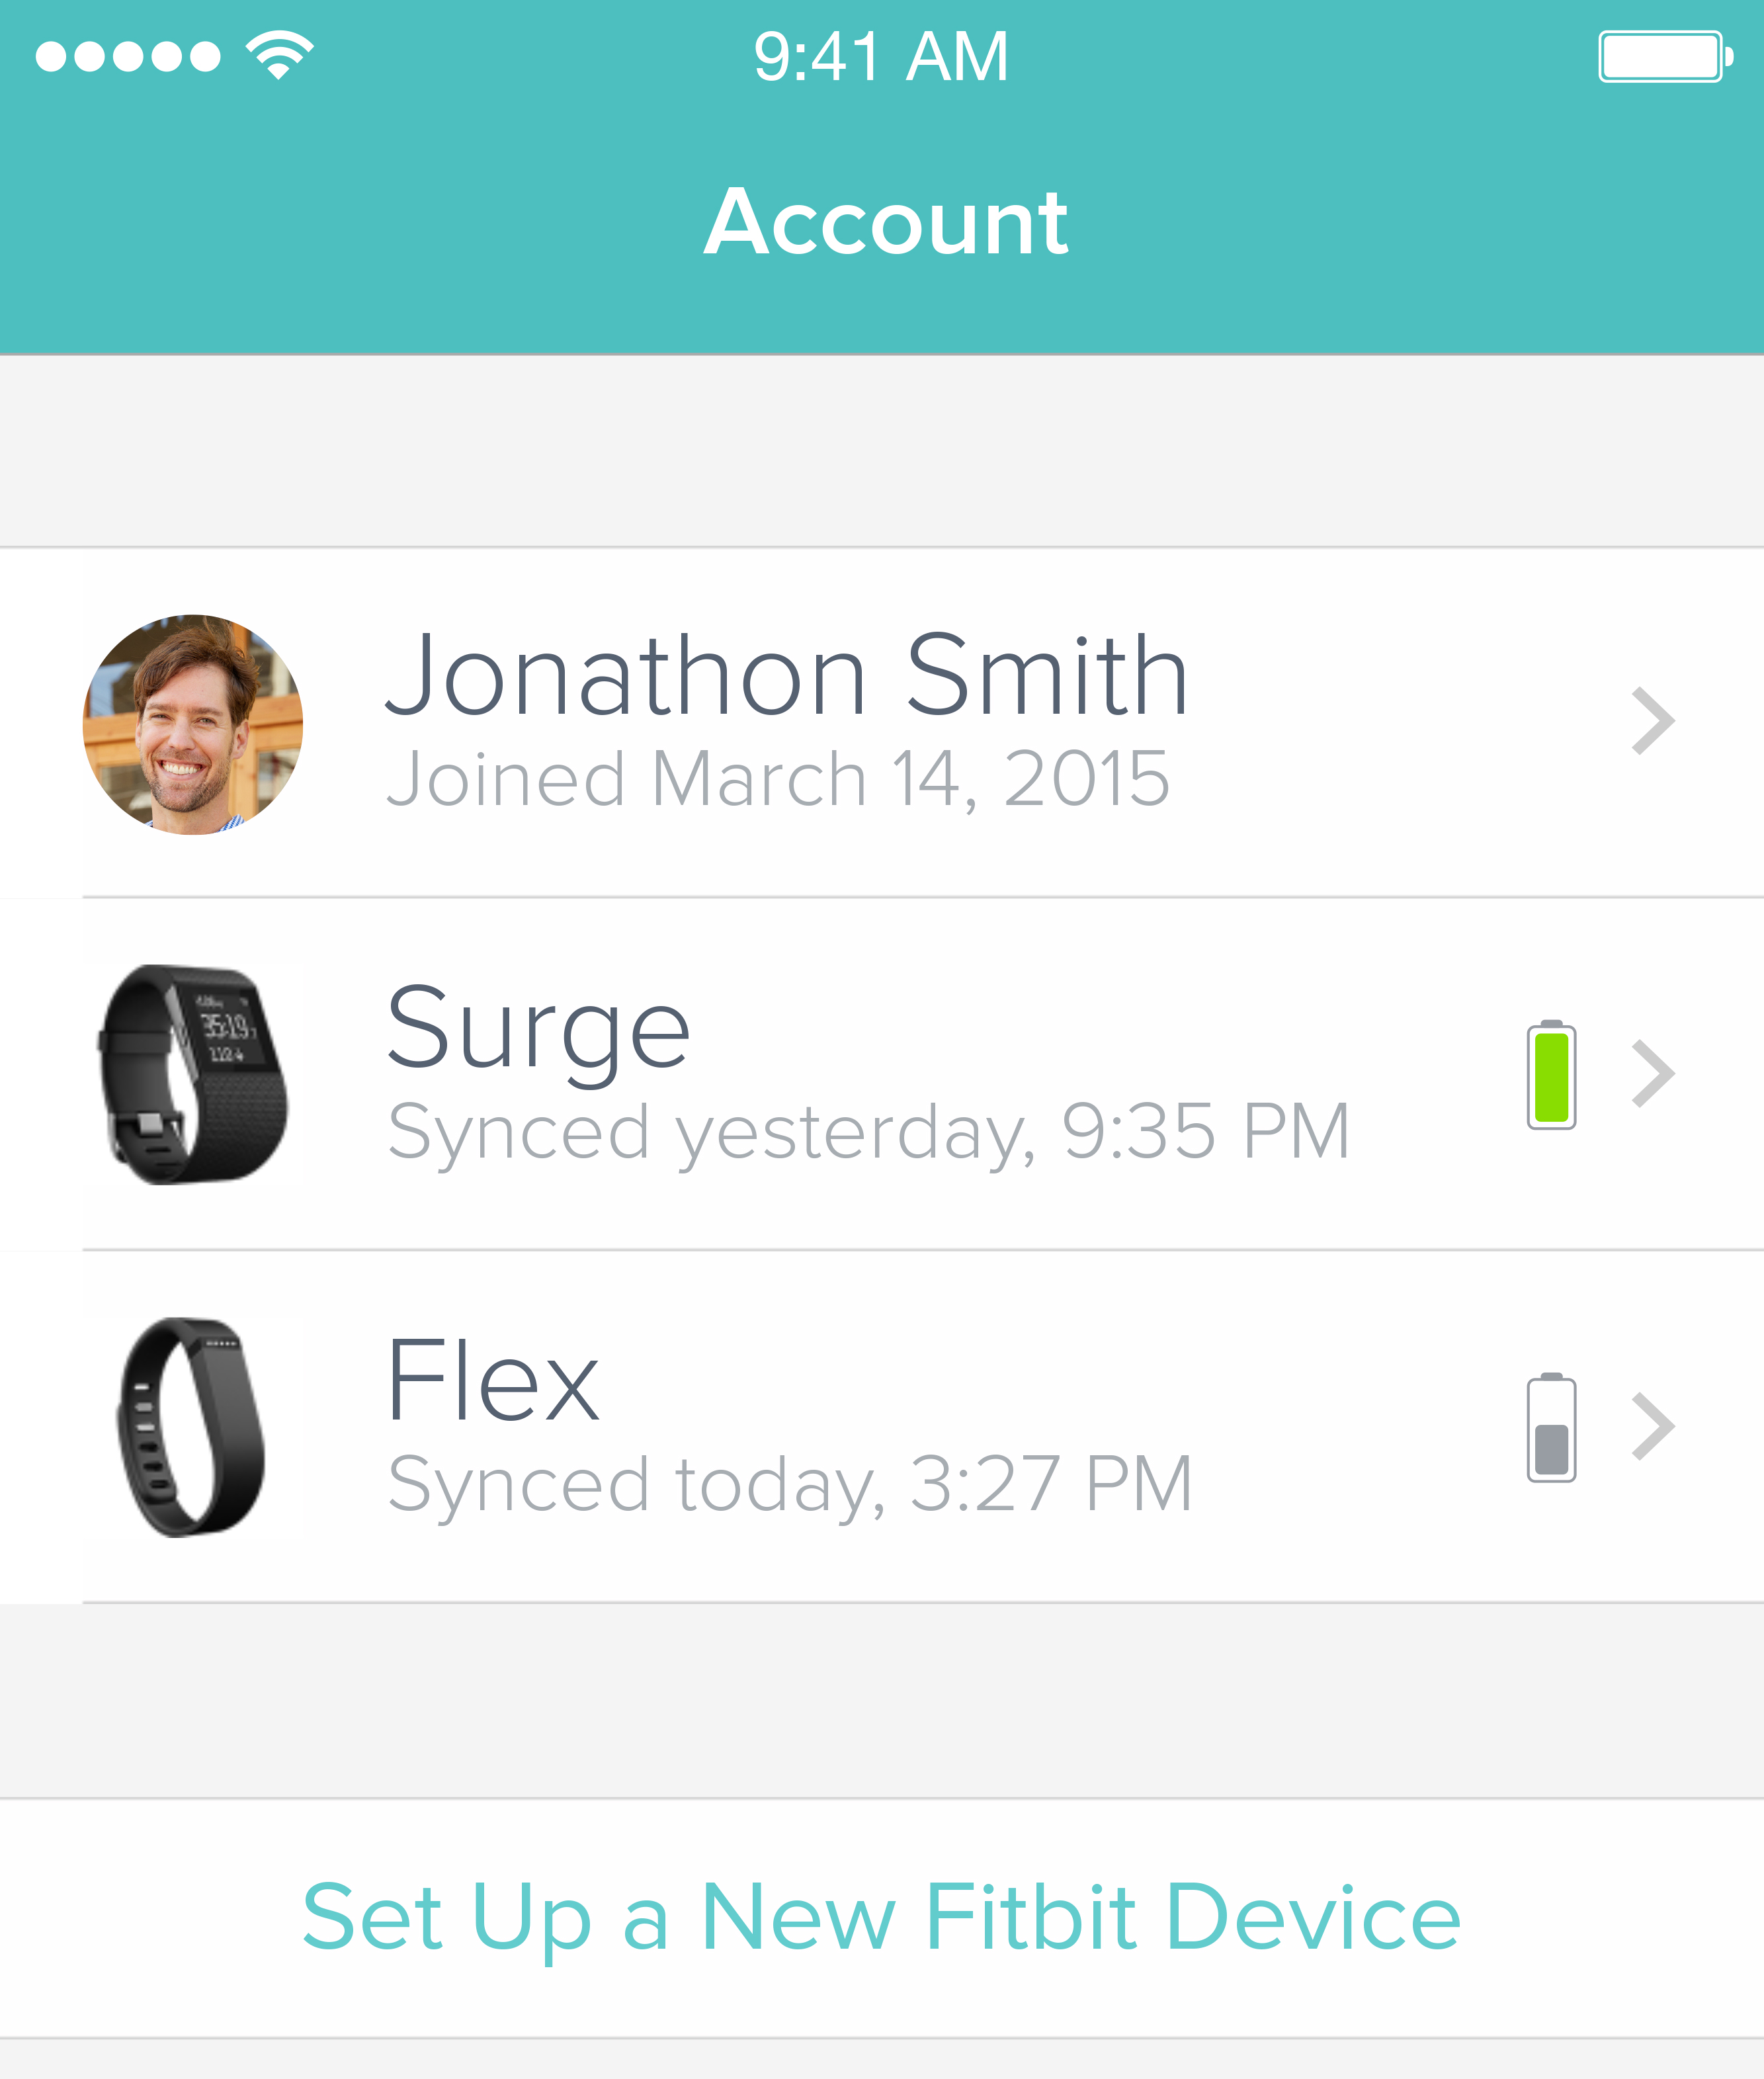 gullig pølse overholdelse Sync Multiple Devices to Your Fitbit Account with Multi-Tracker Support -  Fitbit Blog